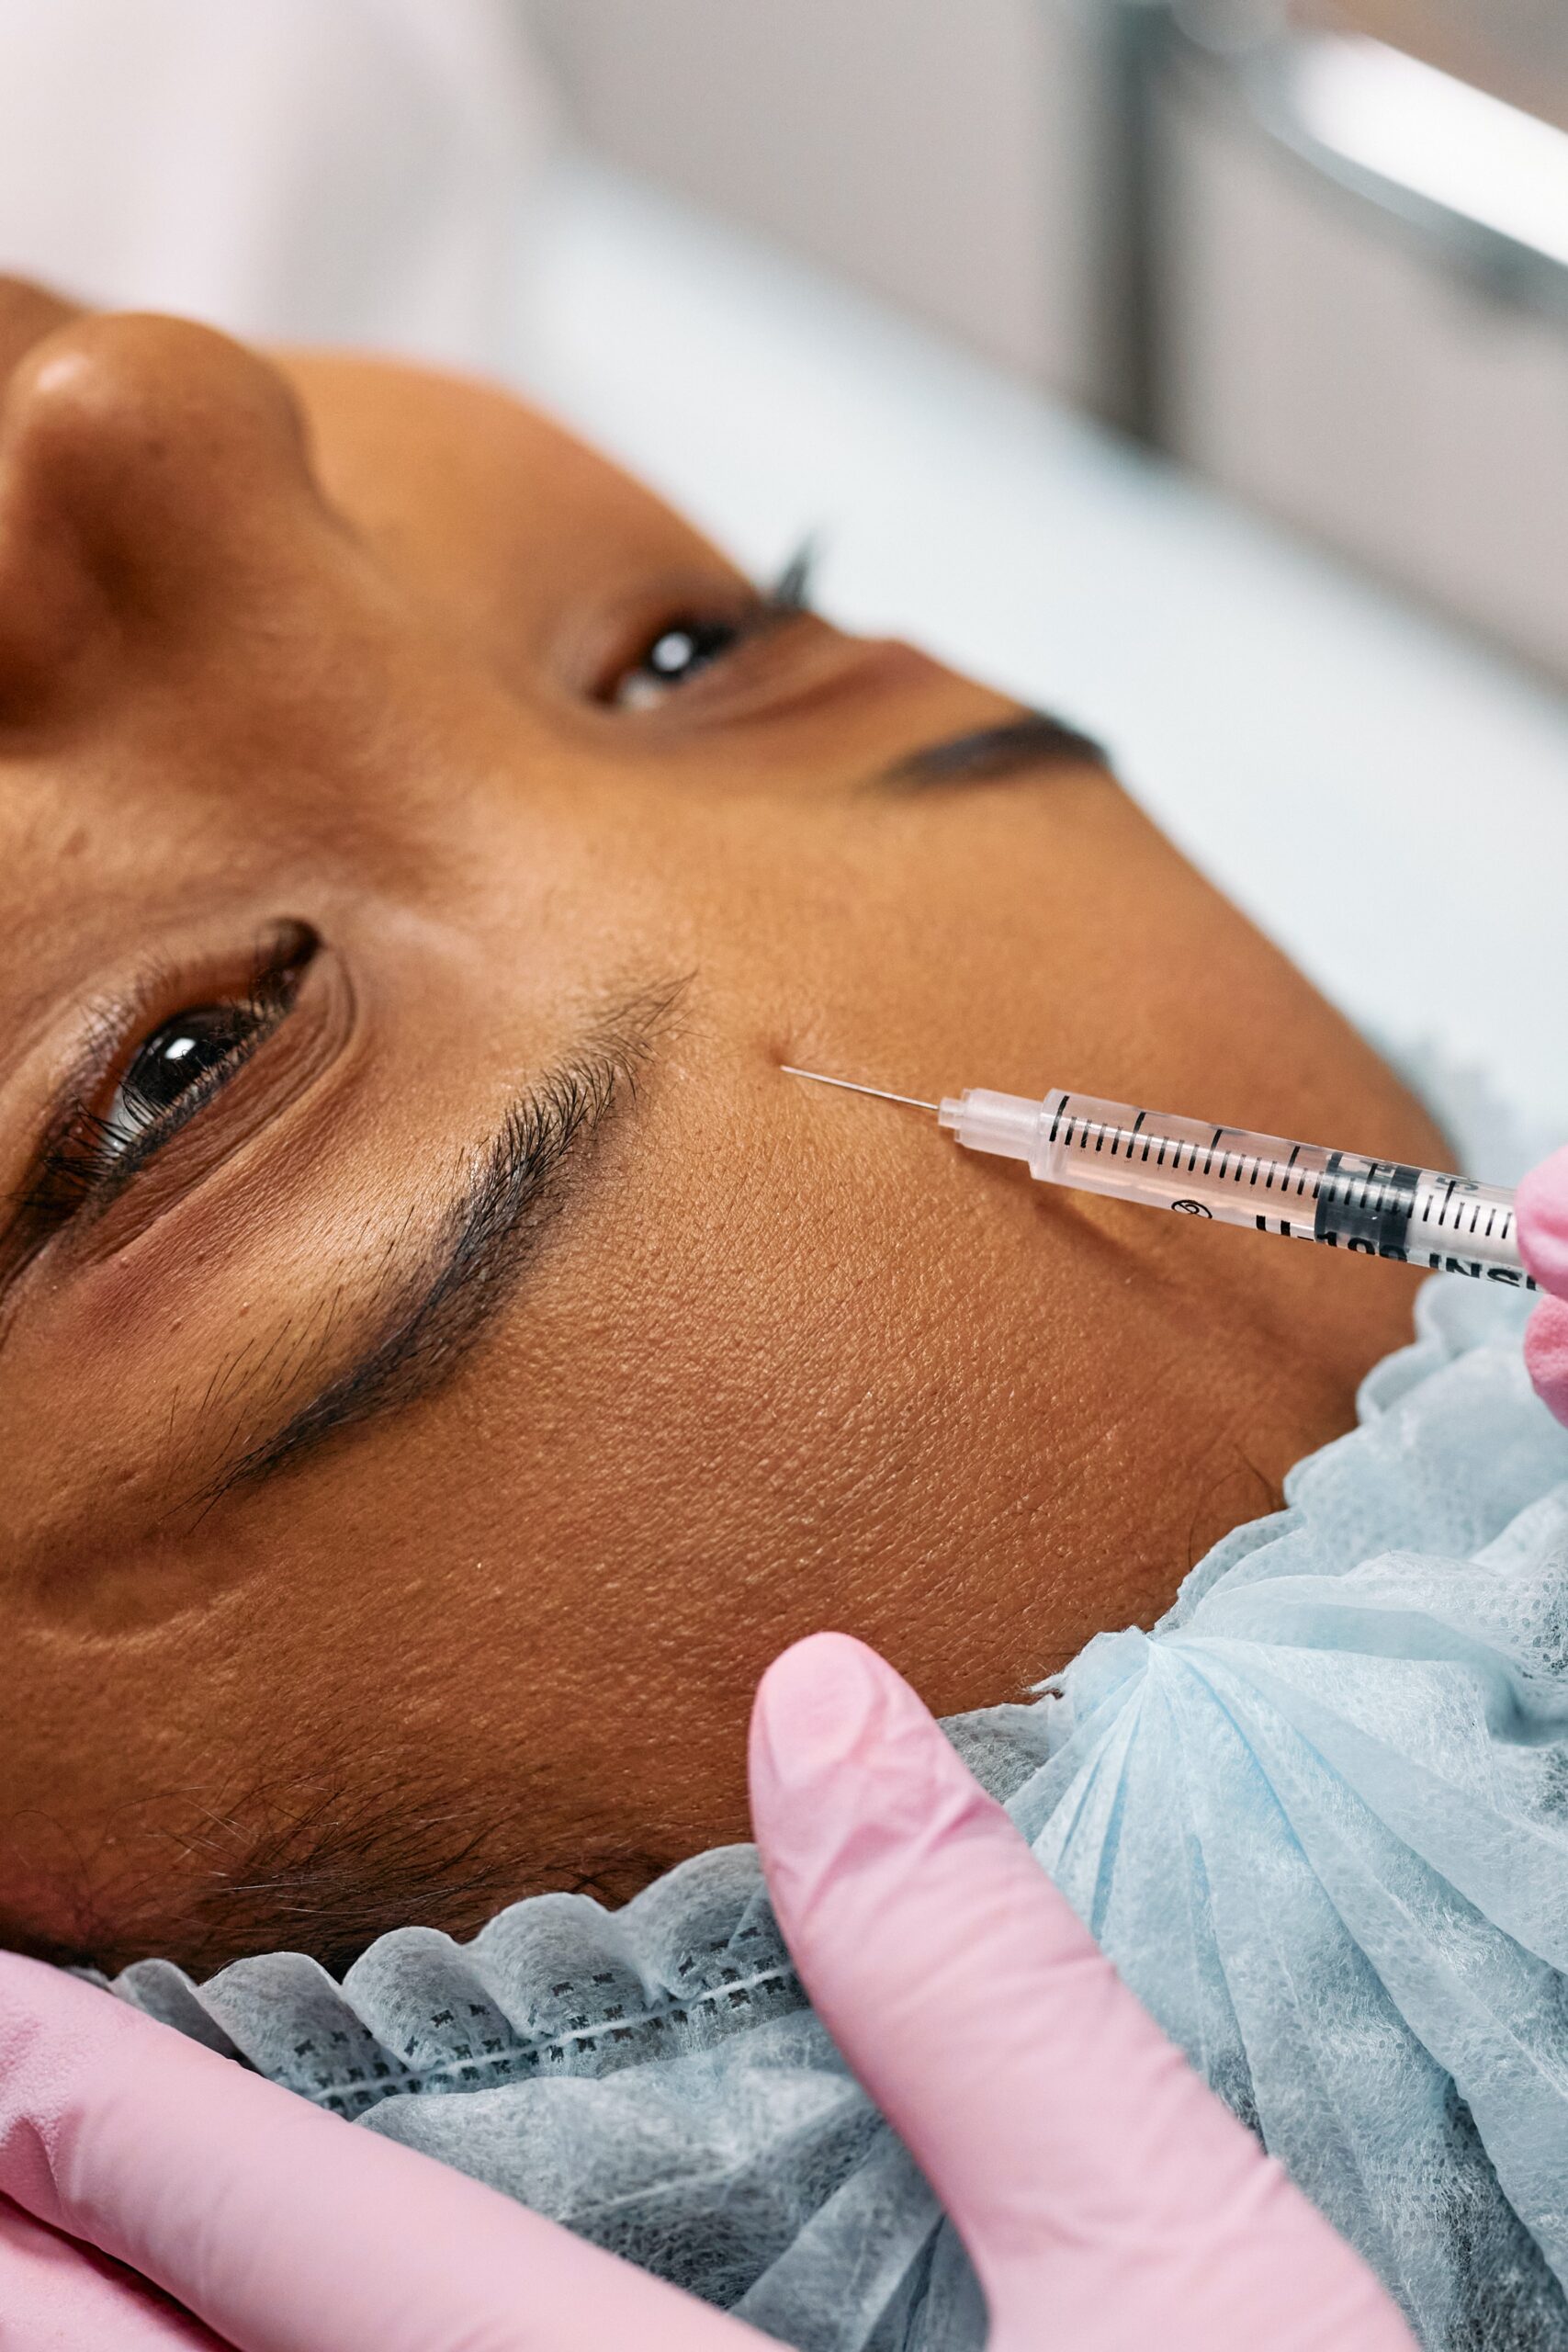 Botox-Botulinum-Toxin-Injection-Price-in-India-scaled